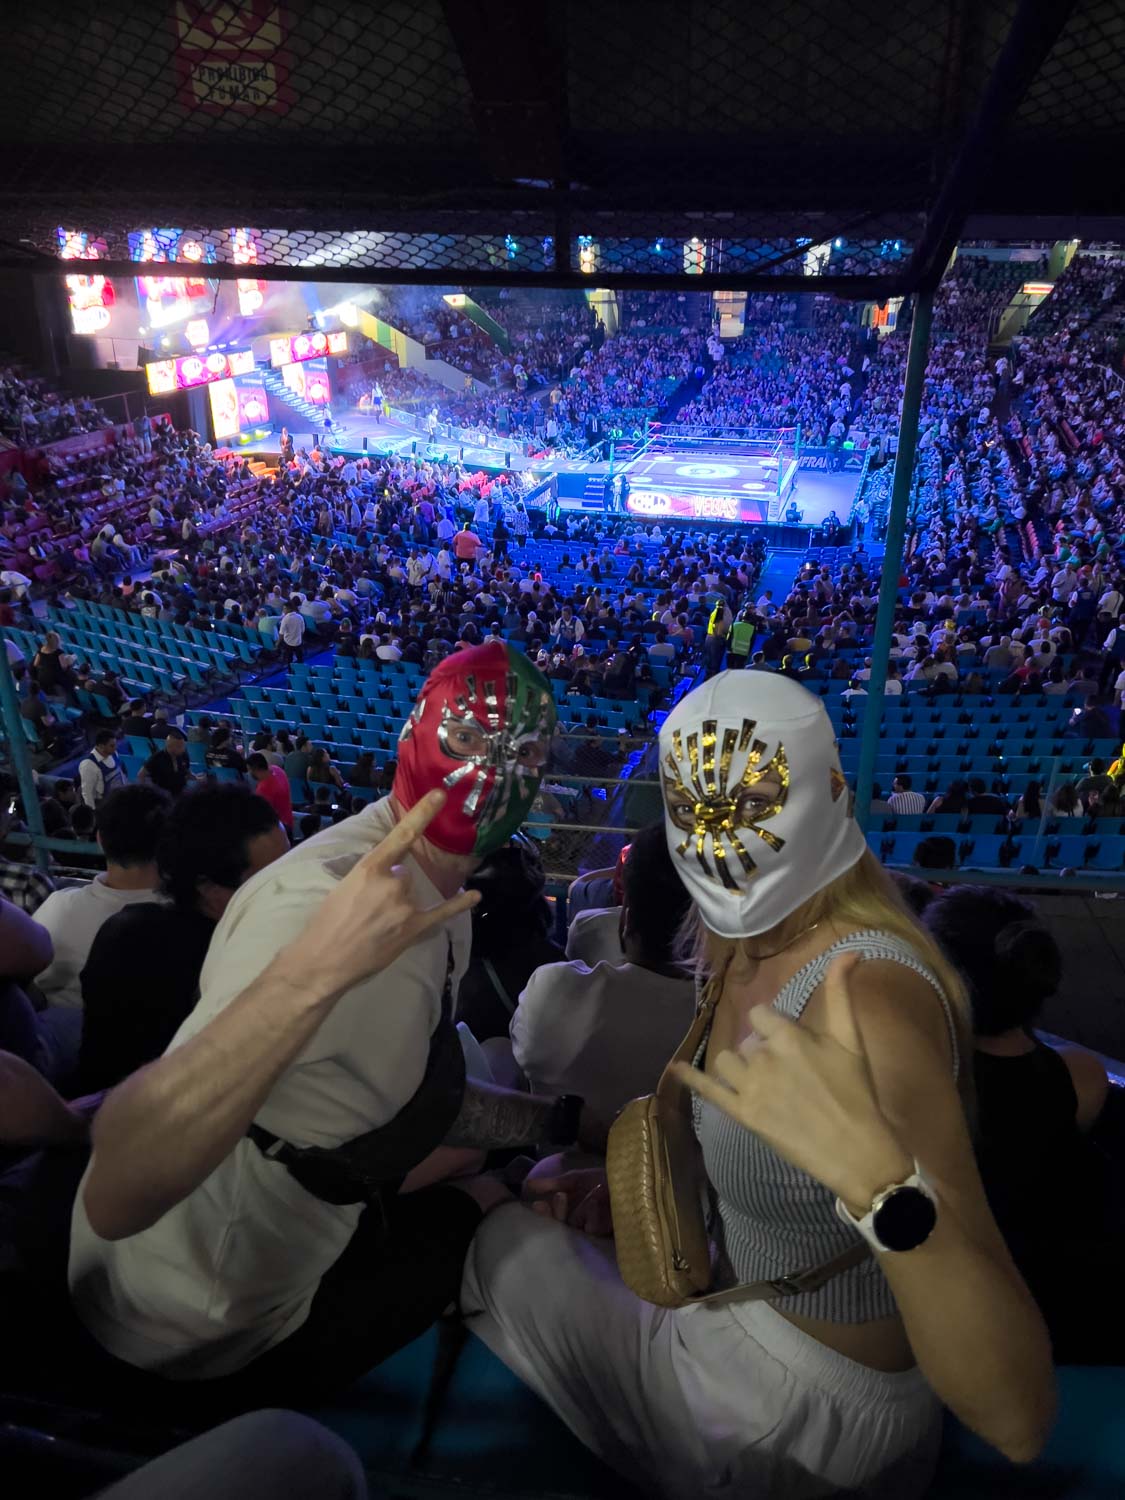 Bloggers Mal and Robin attending a Lucha Libre show in Mexico City.